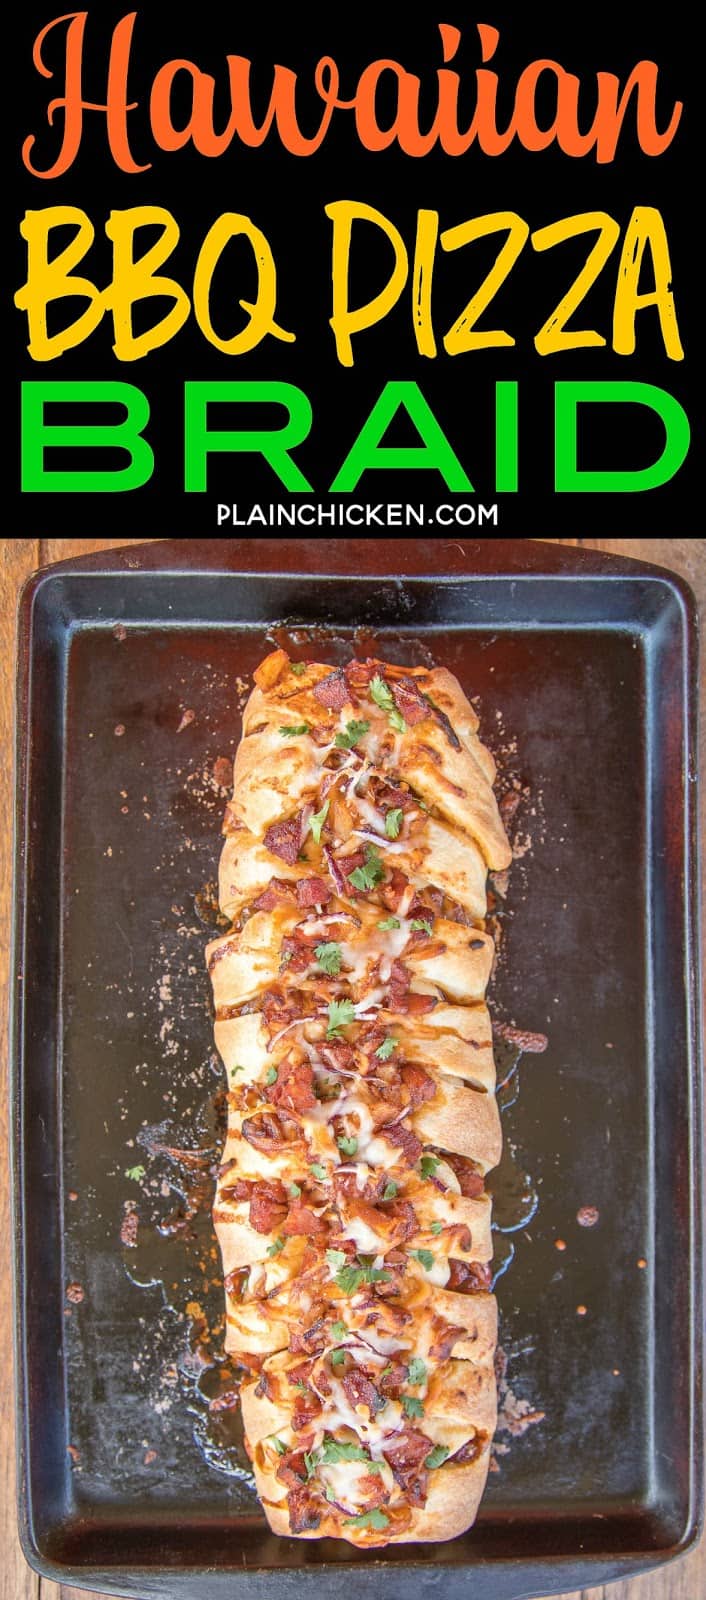 Hawaiian BBQ Pizza Braid - ready in under 30 minutes! Ham, pineapple, BBQ sauce, mozzarella, cilantro and red onions baked in refrigerated pizza dough. Fun twist to pizza night!!! Everyone LOVES this easy stuffed bread!! #pizza #hawaiianbbqpizza #bbqpizza